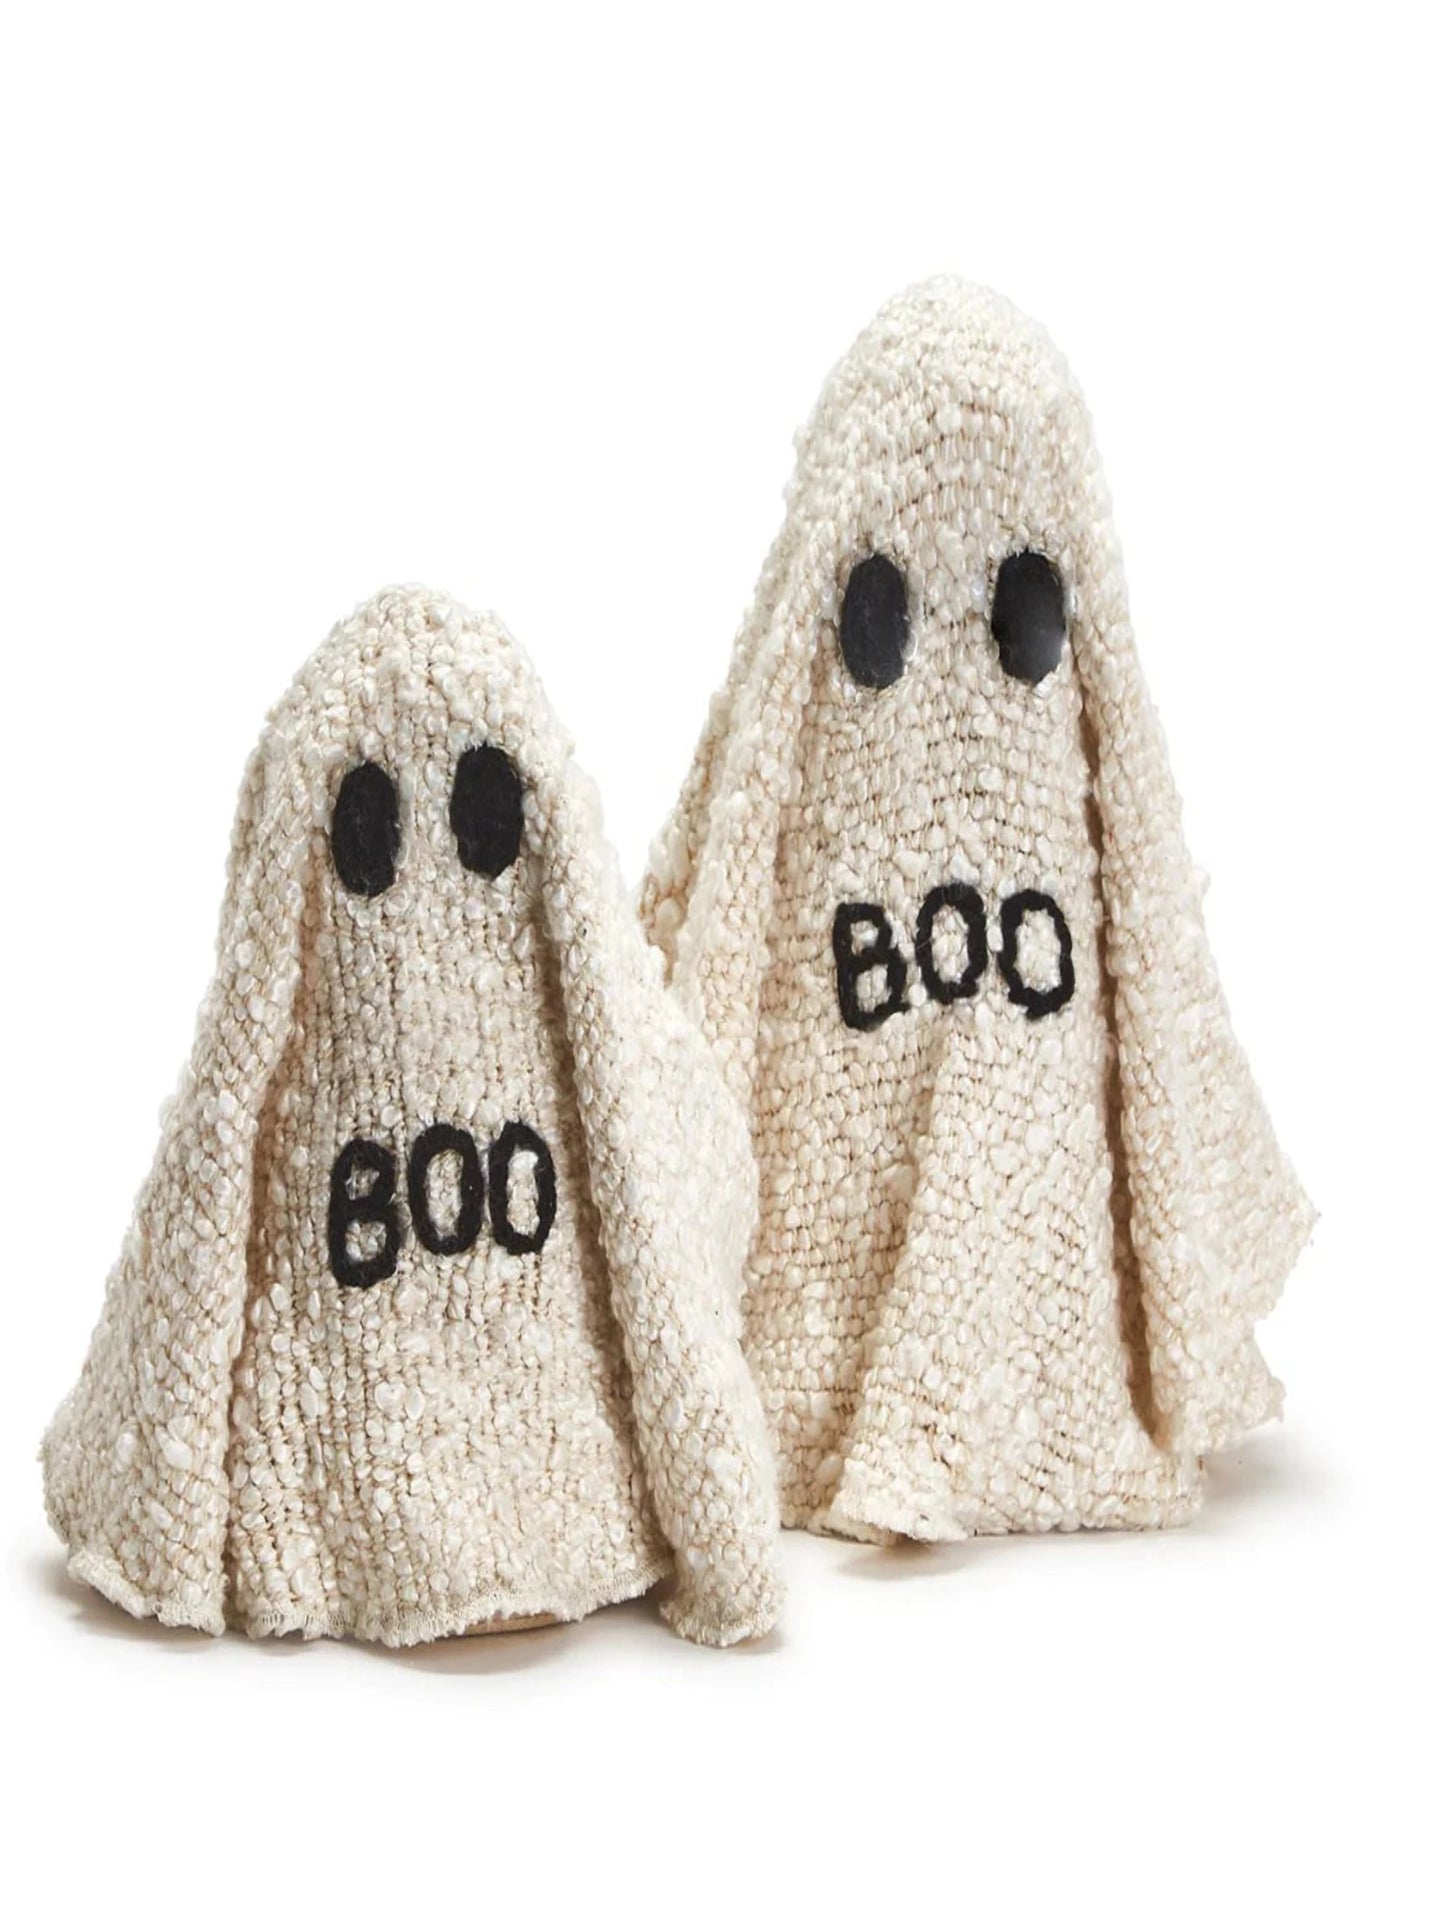 BOO GHOSTS